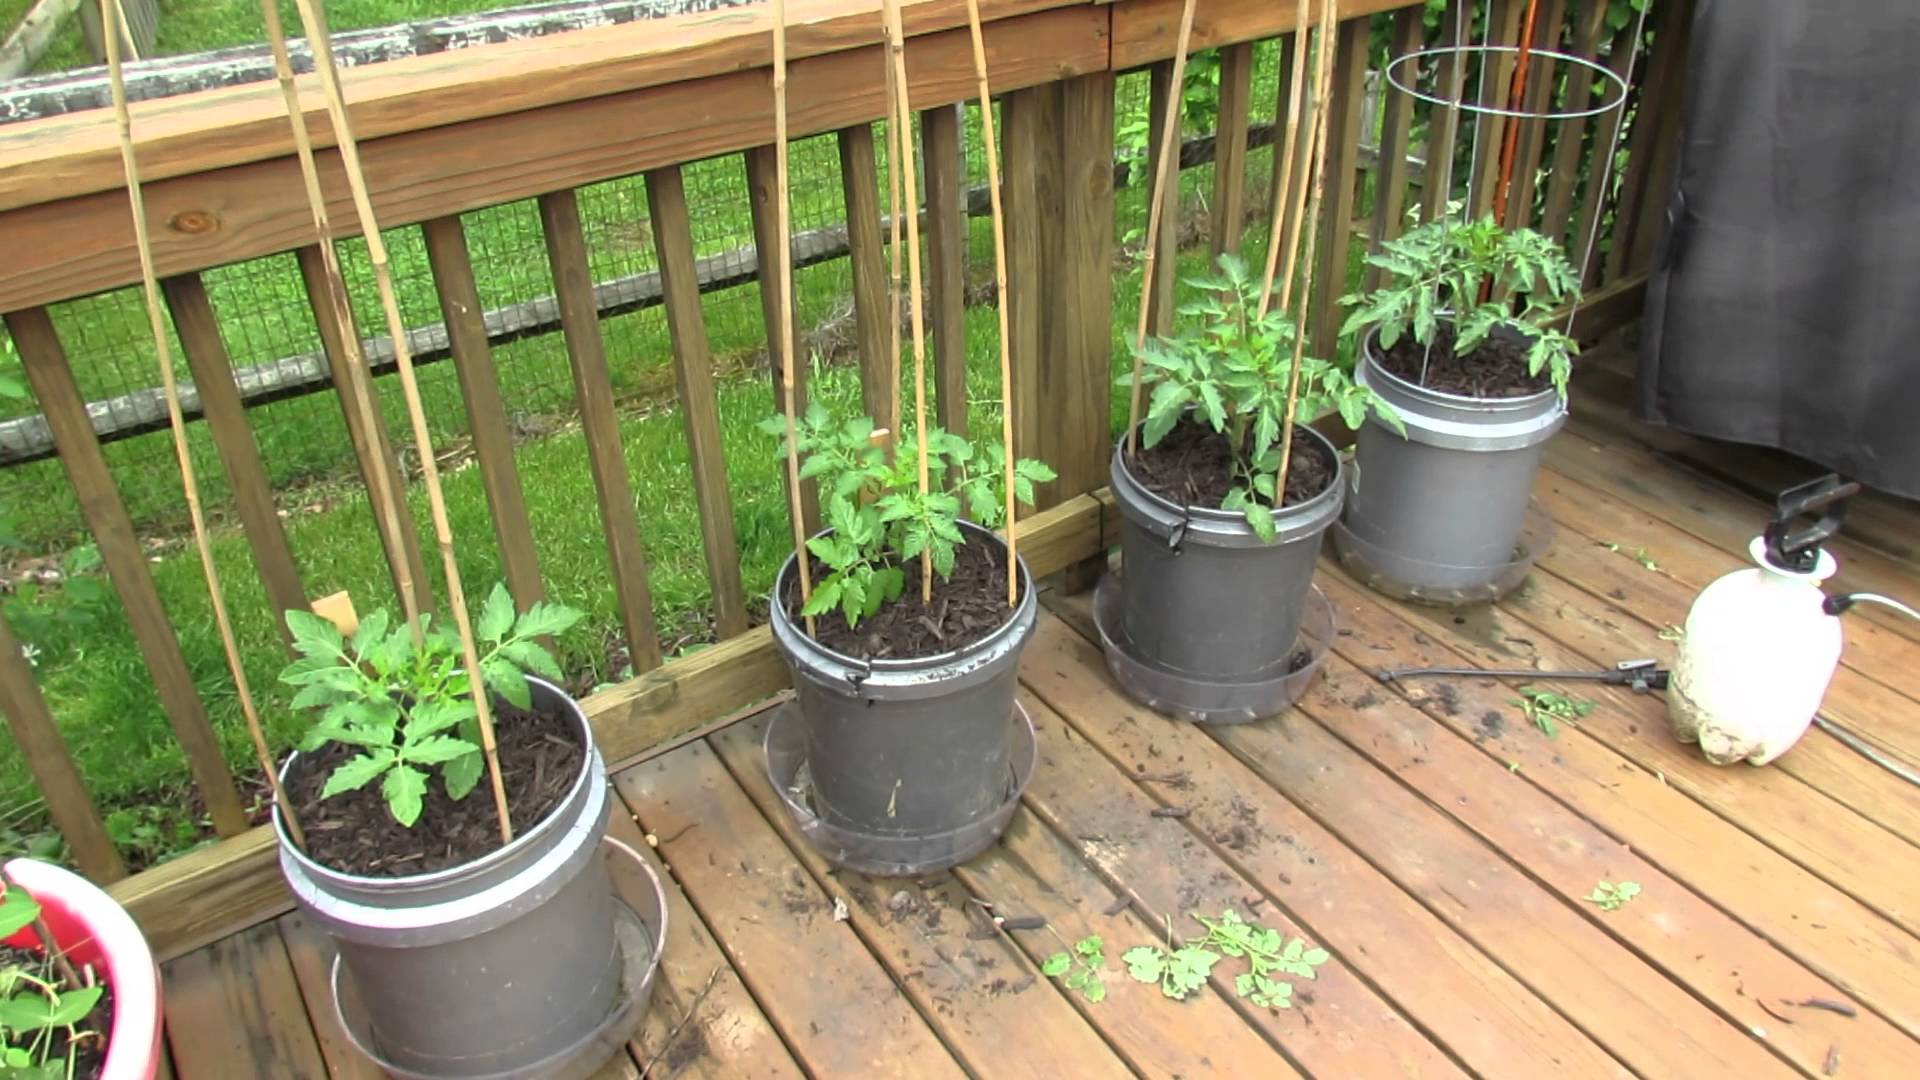 Preparing for large tomato plant growth. - The Tomato Tutorial: Tips on How to Grow Your Own Tomatoes